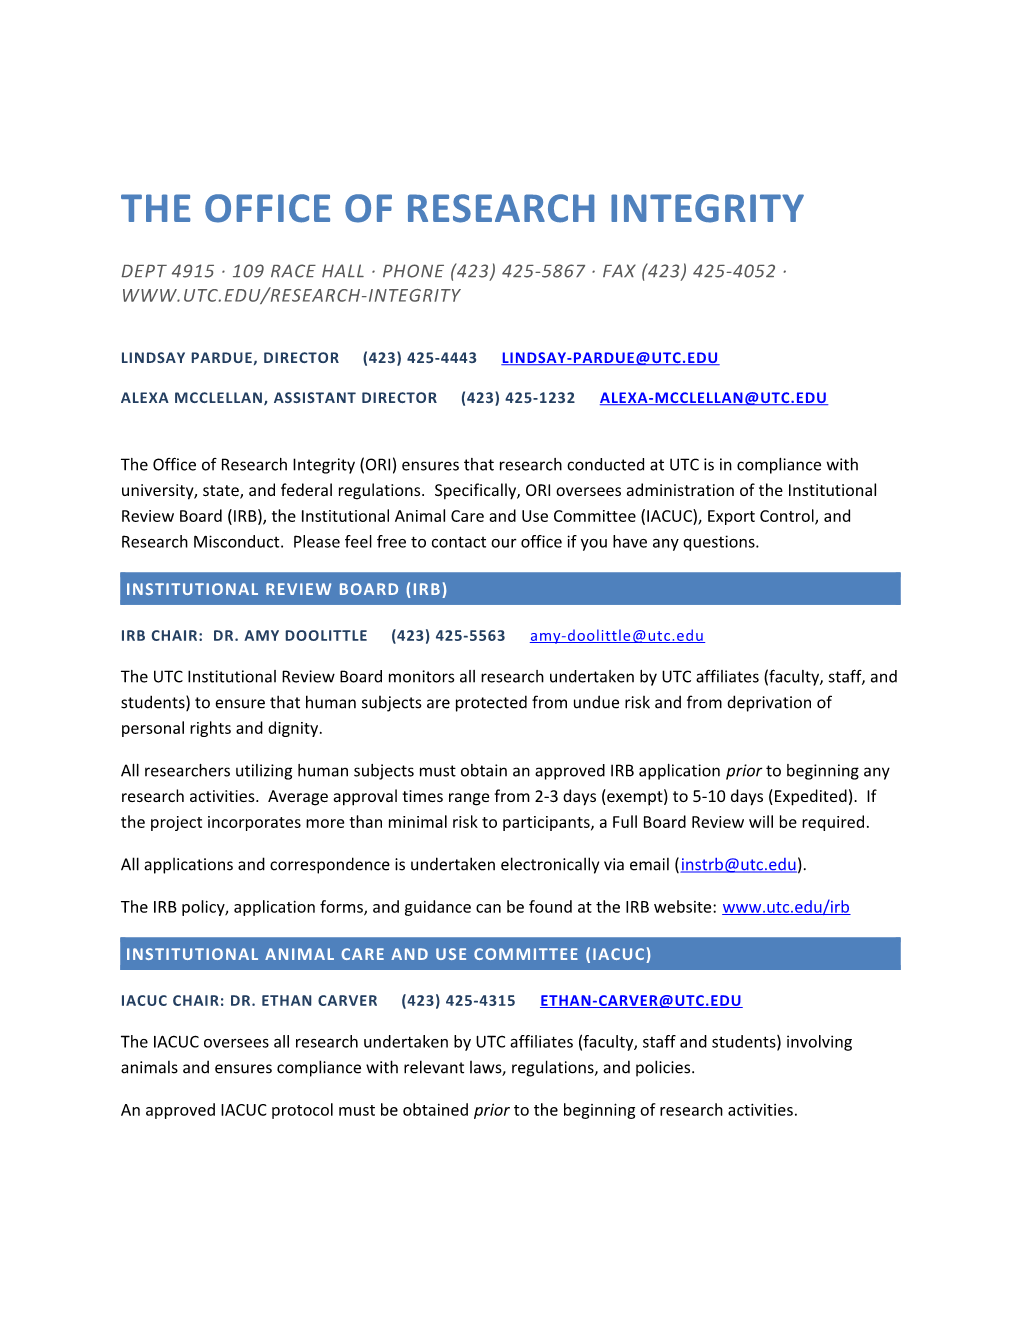 The Office of Research Integrity